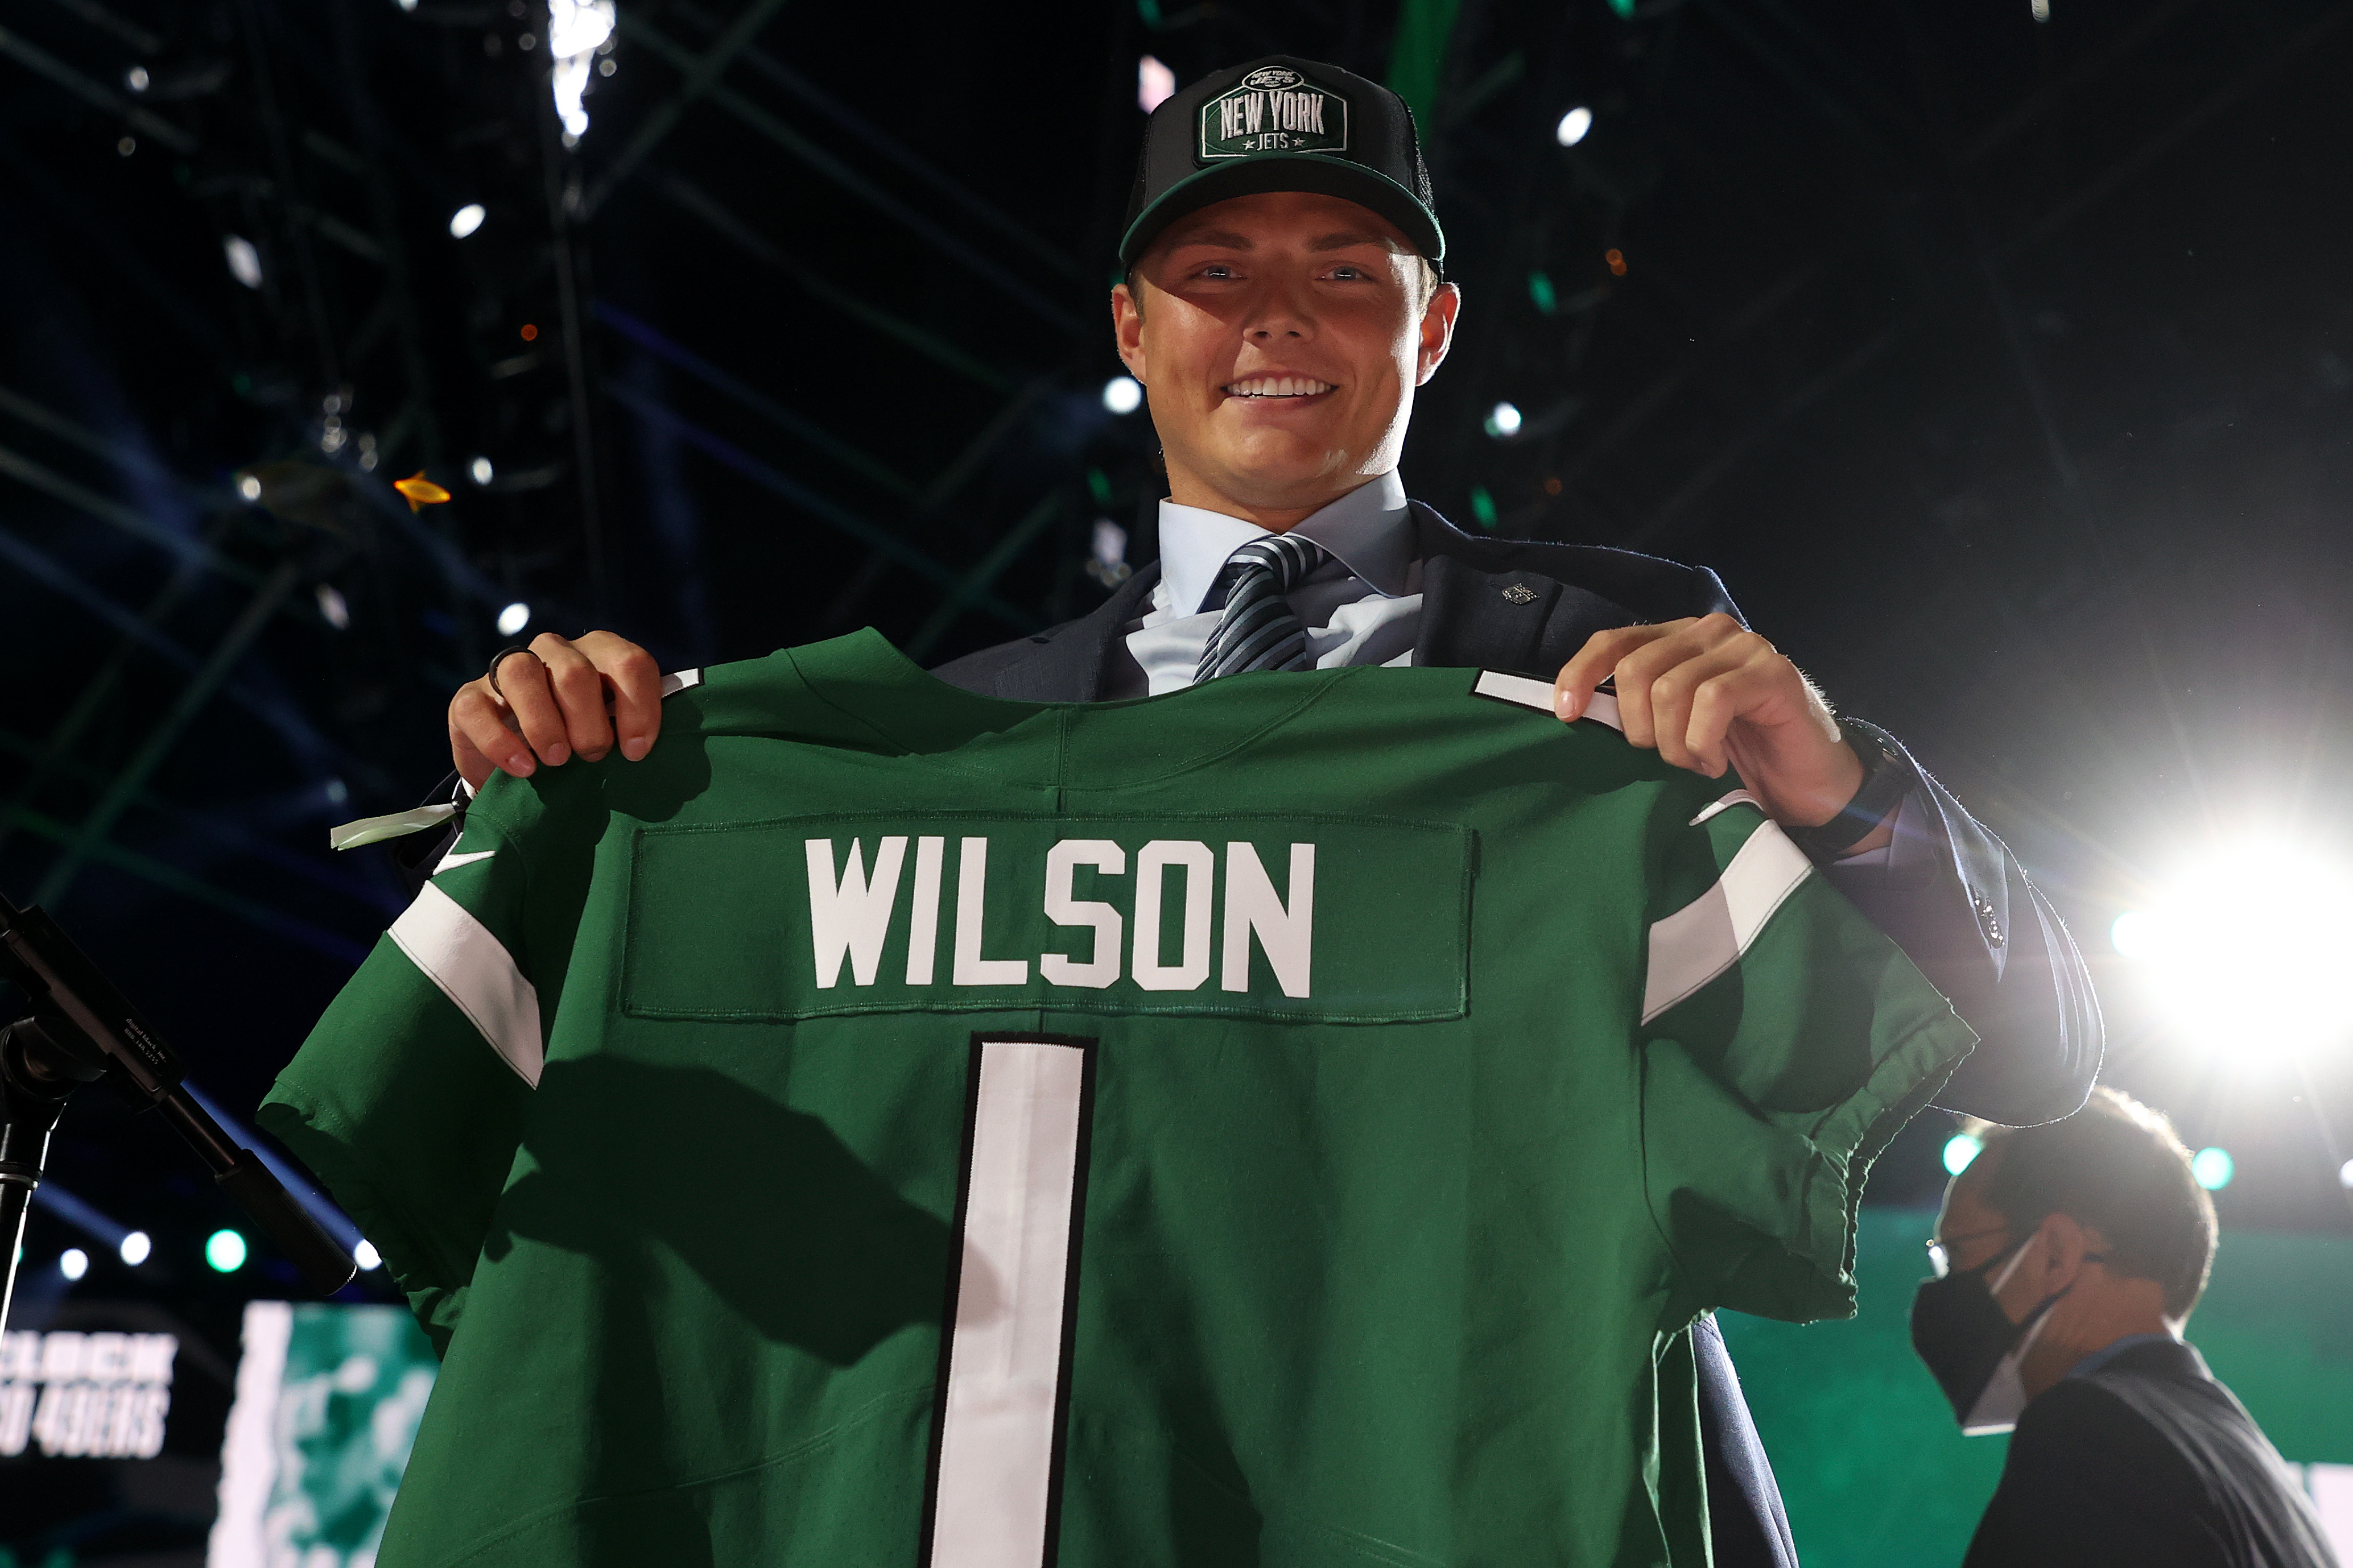 Zach Wilson holds a jersey onstage after being drafted second by the New York Jets during round one of the 2021 NFL Draft at the Great Lakes Science Center on April 29, 2021 in Cleveland, Ohio.